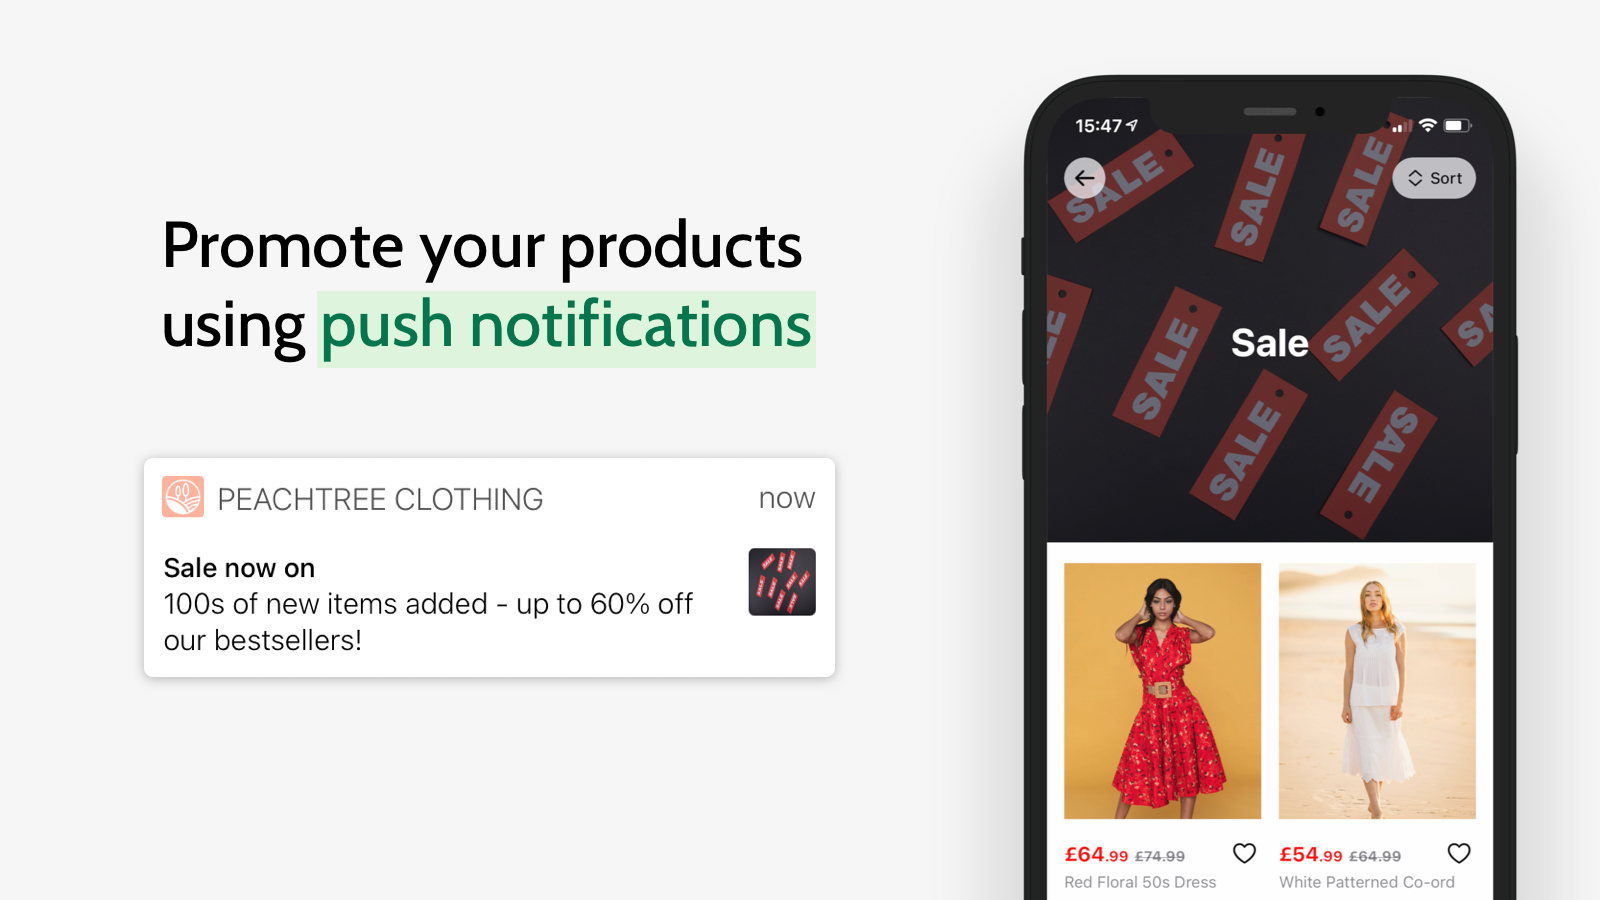 Promote your products using push notifications